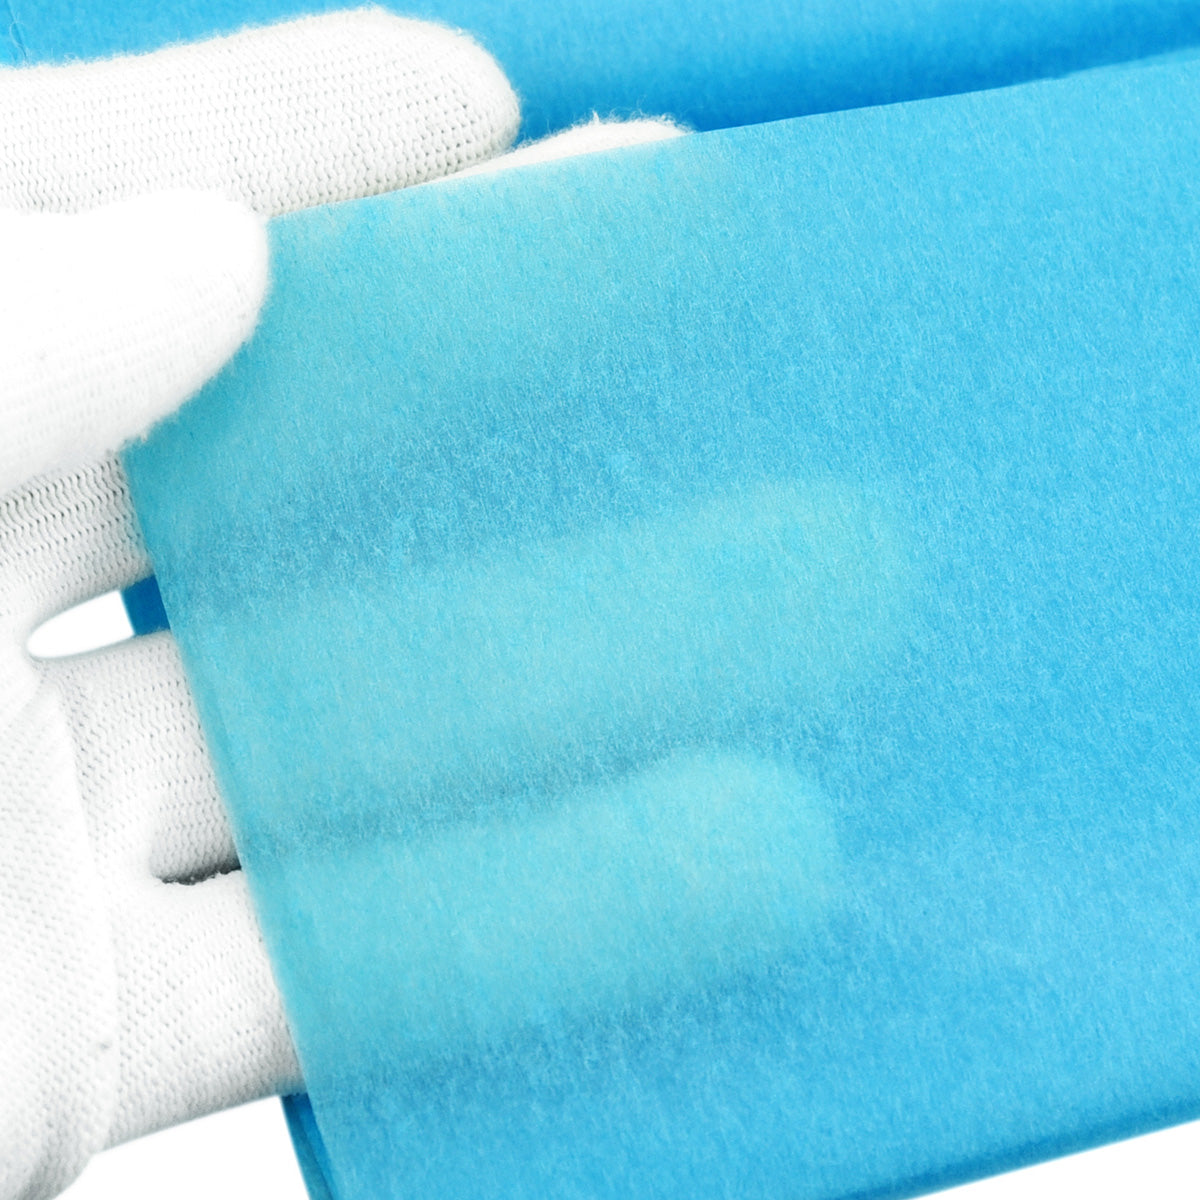 50 Sheets Skyblue Wrapping Tissue Paper